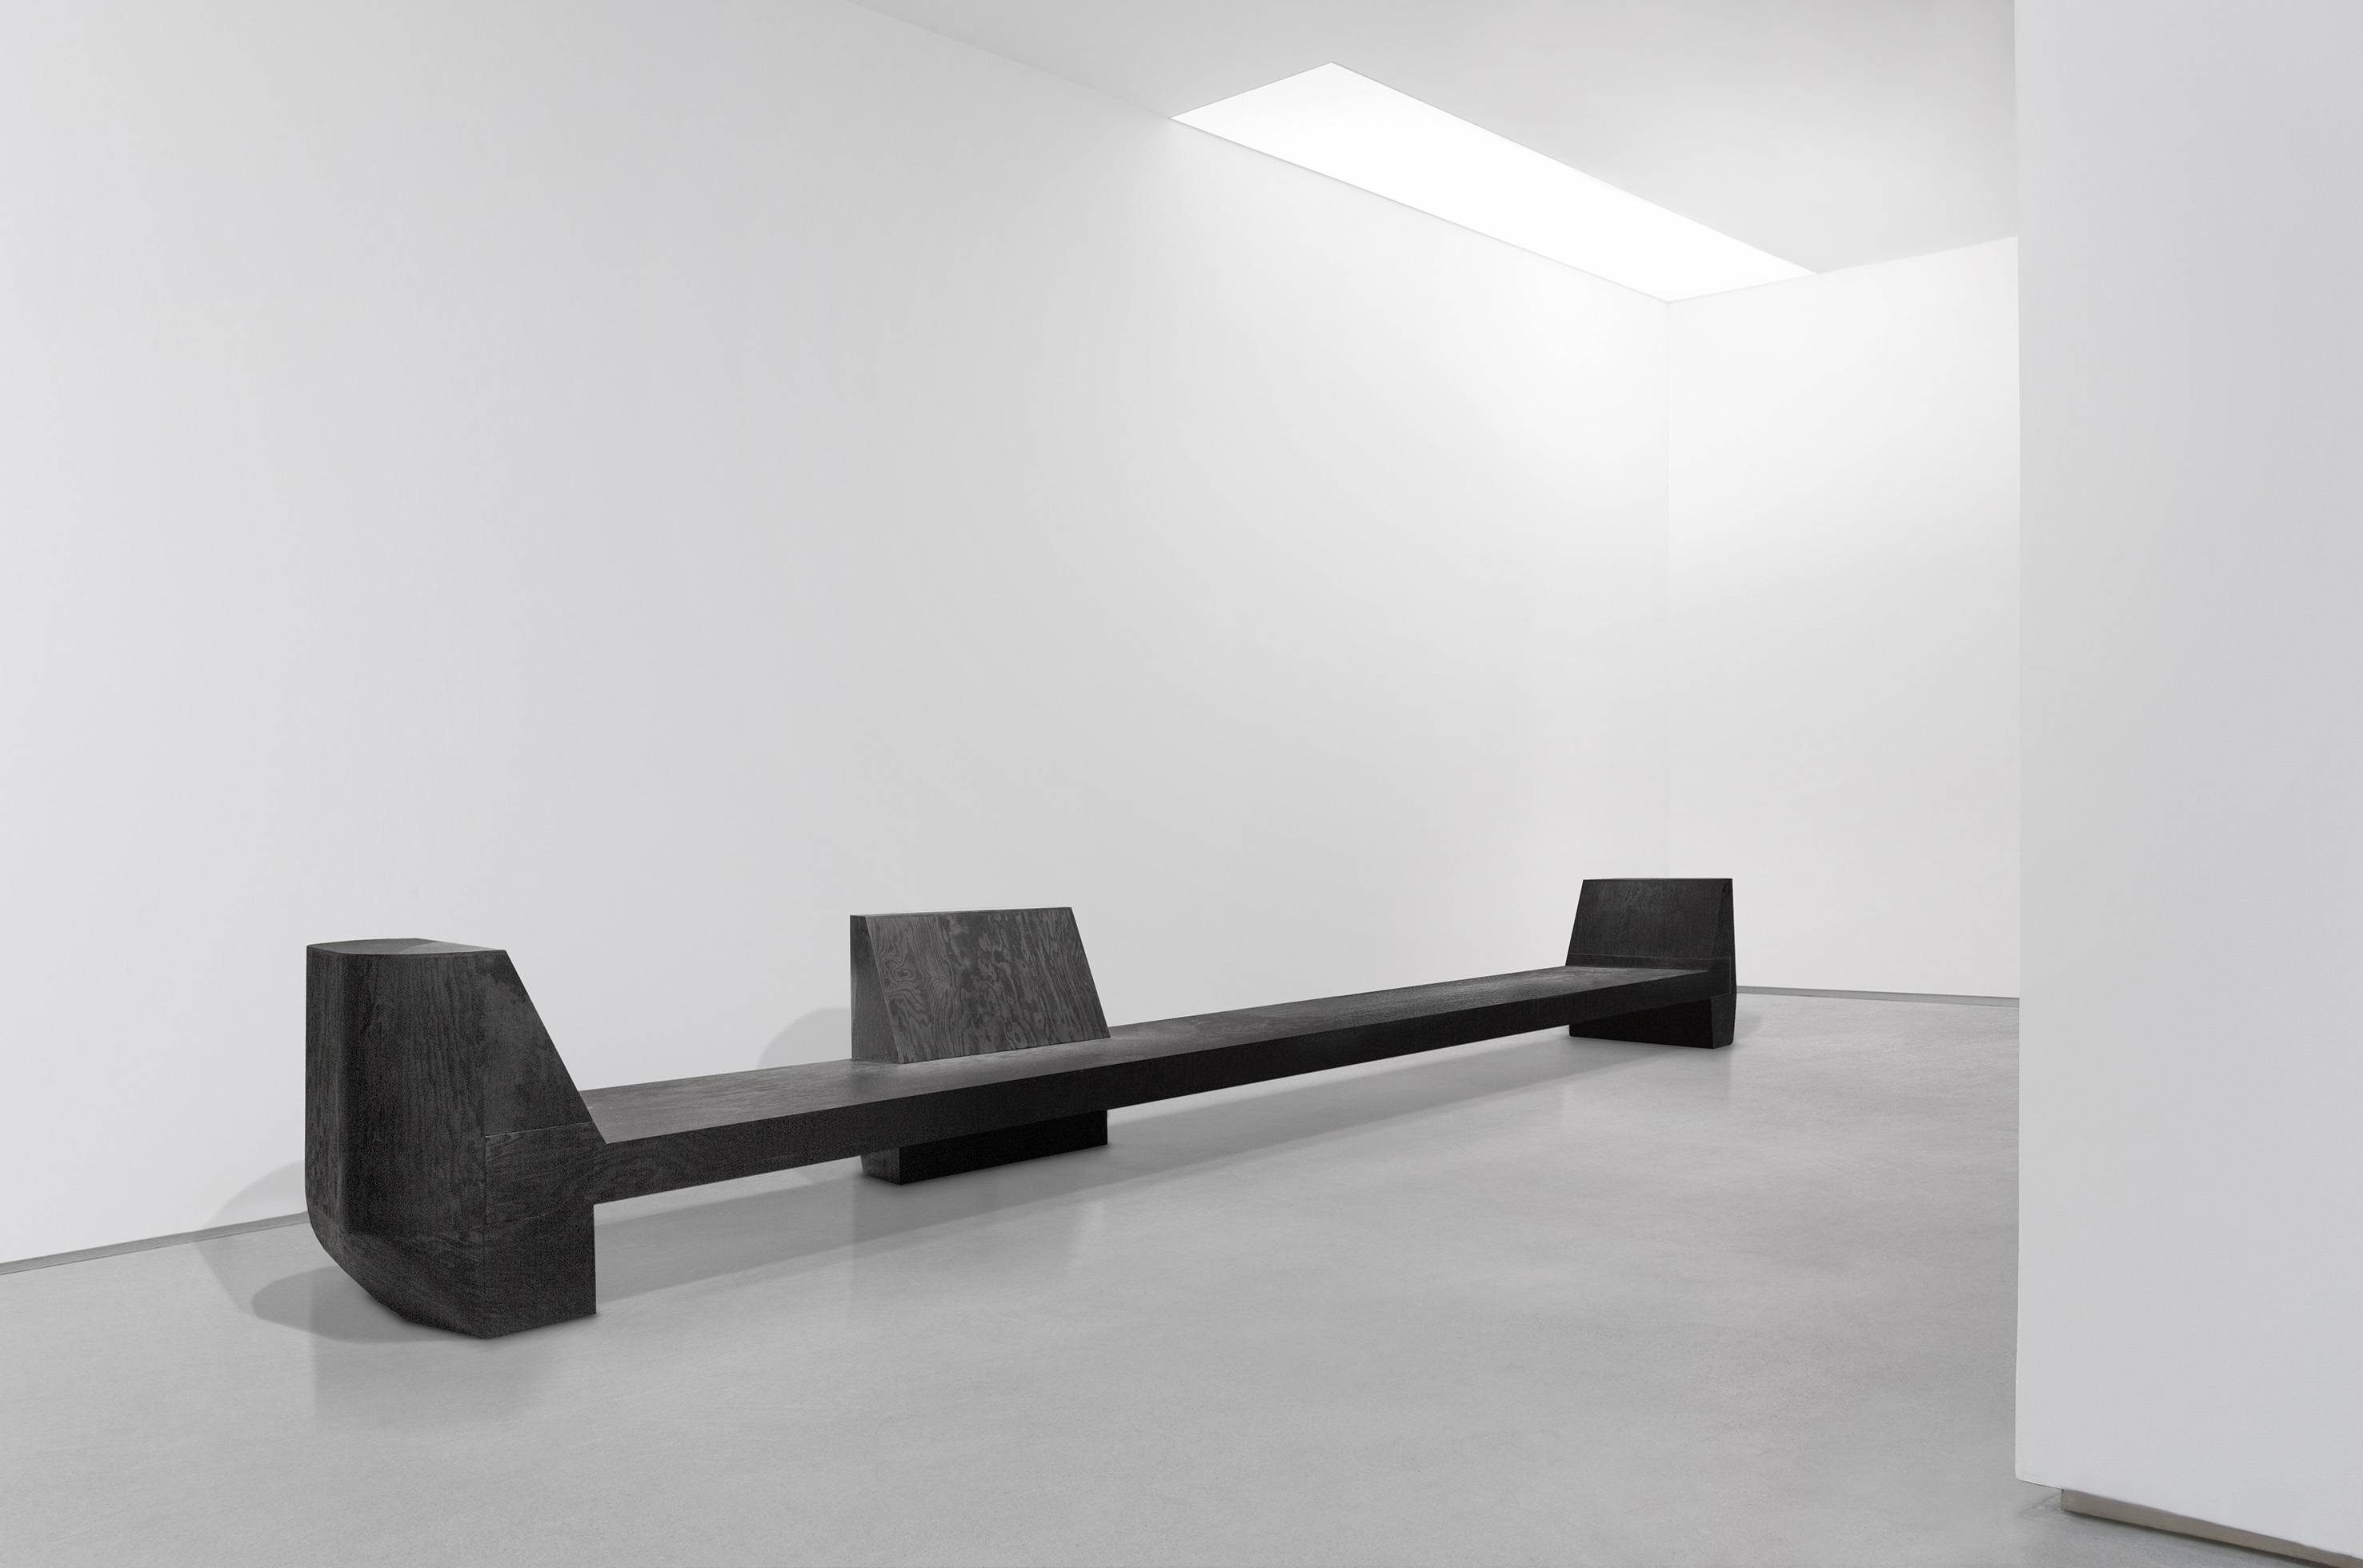 Rick Owens’ furniture collection – The birth of brutalism – Public Delivery